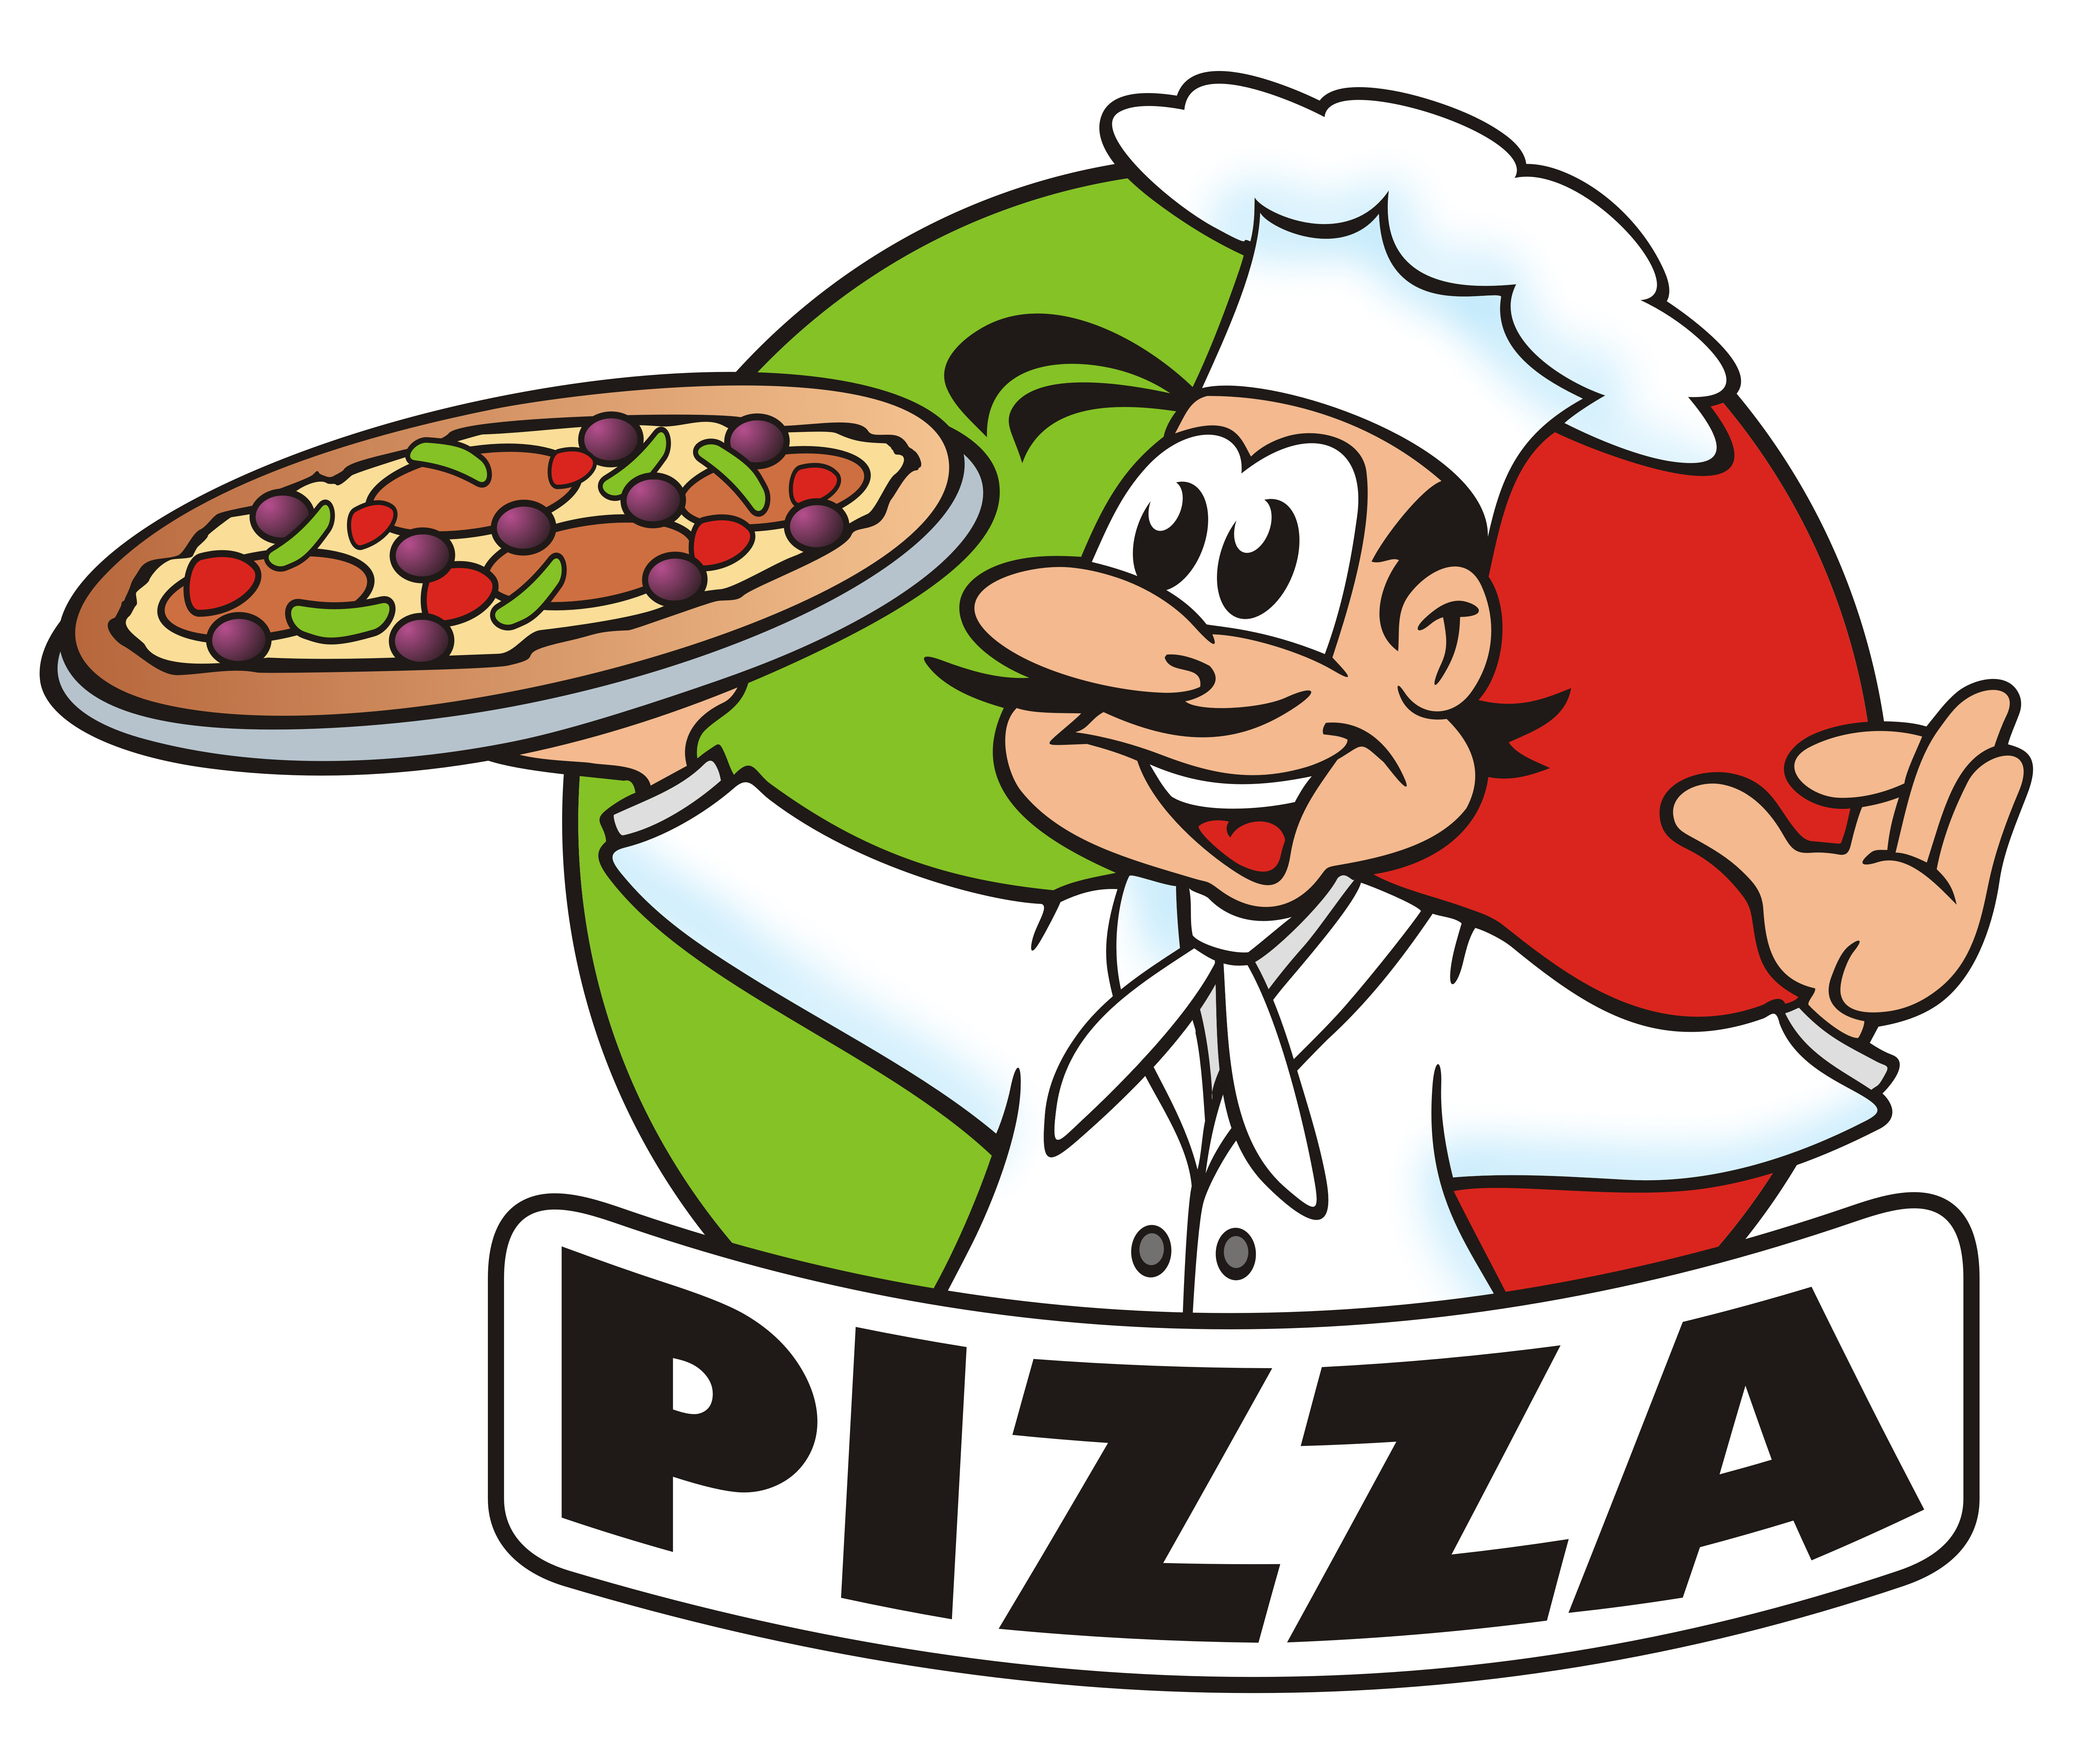 Pizza Delivery Images - Cliparts.co